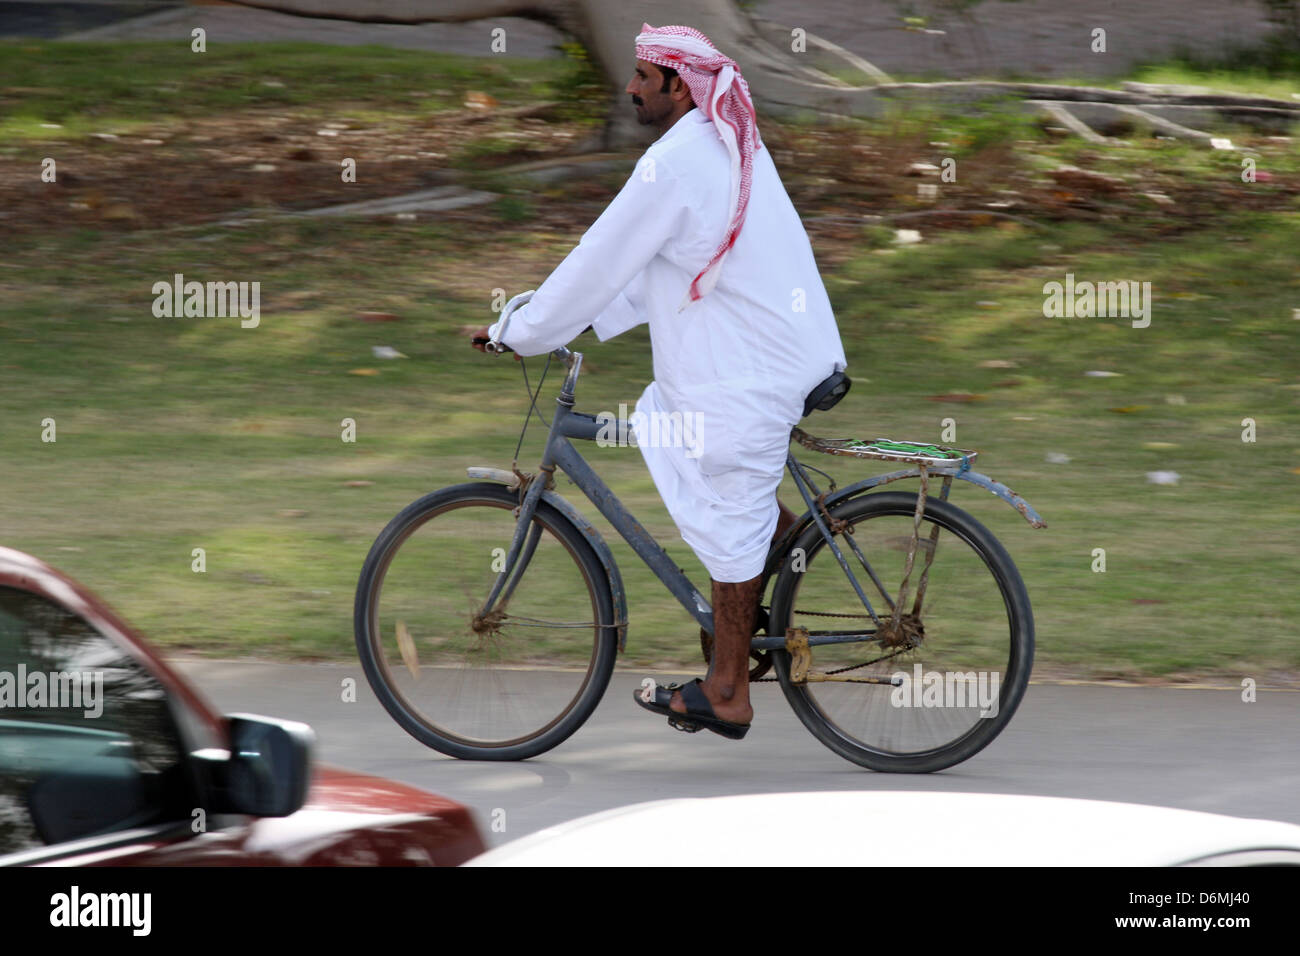 Dubai man in national costume rides a bicycle Stock Photo